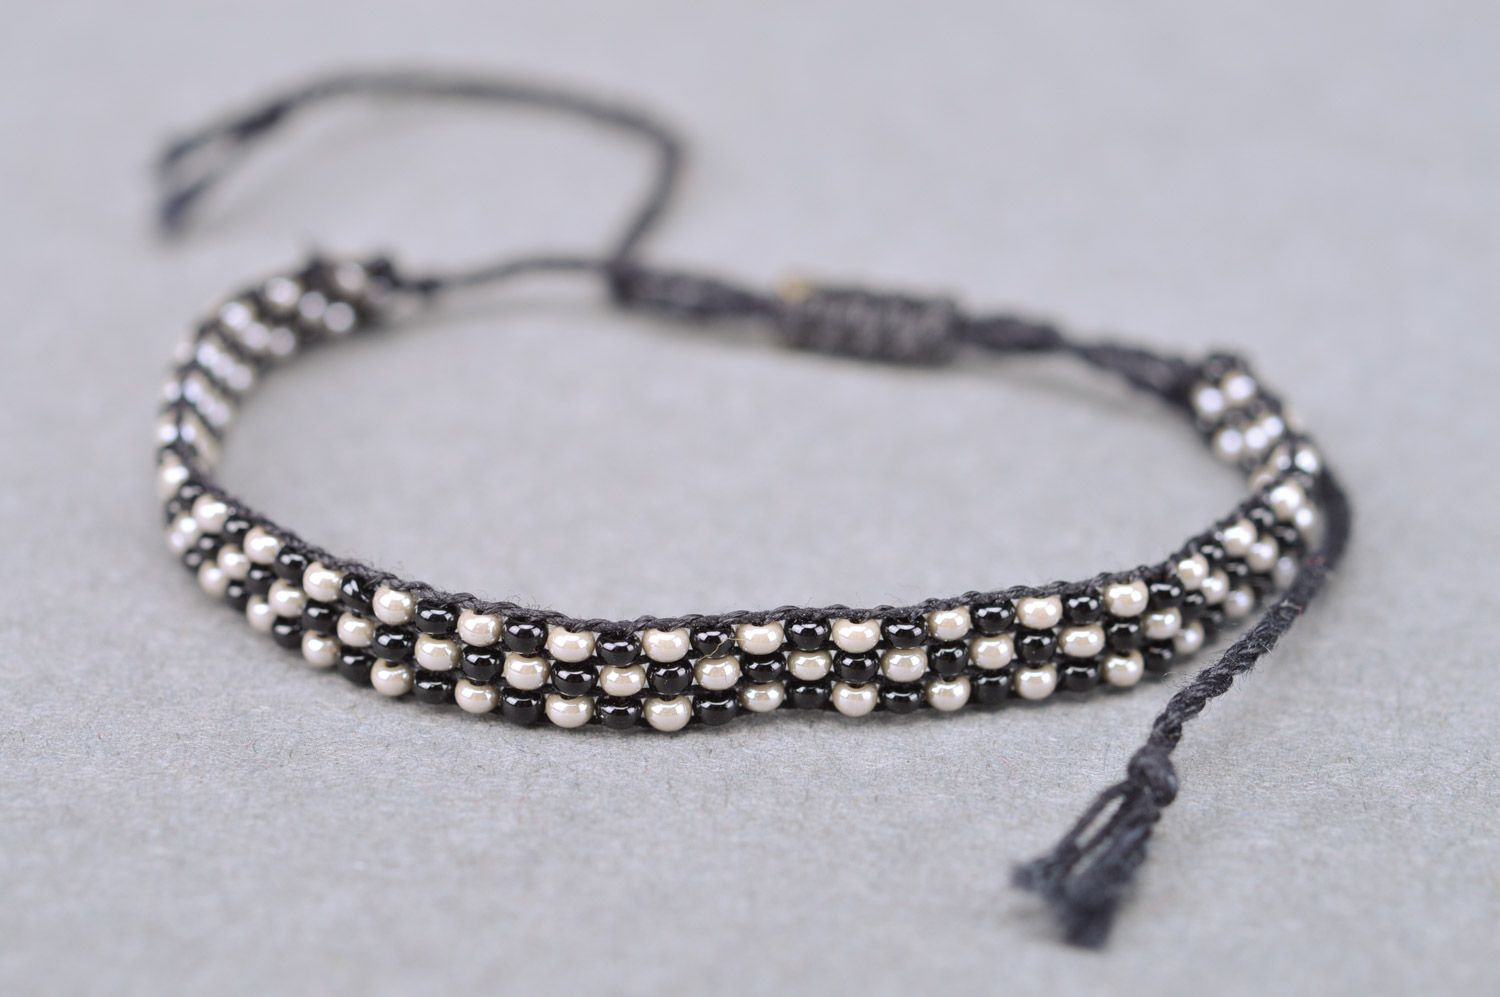 Handmade wrist bracelet woven of black and nacre beads with ties for women photo 2